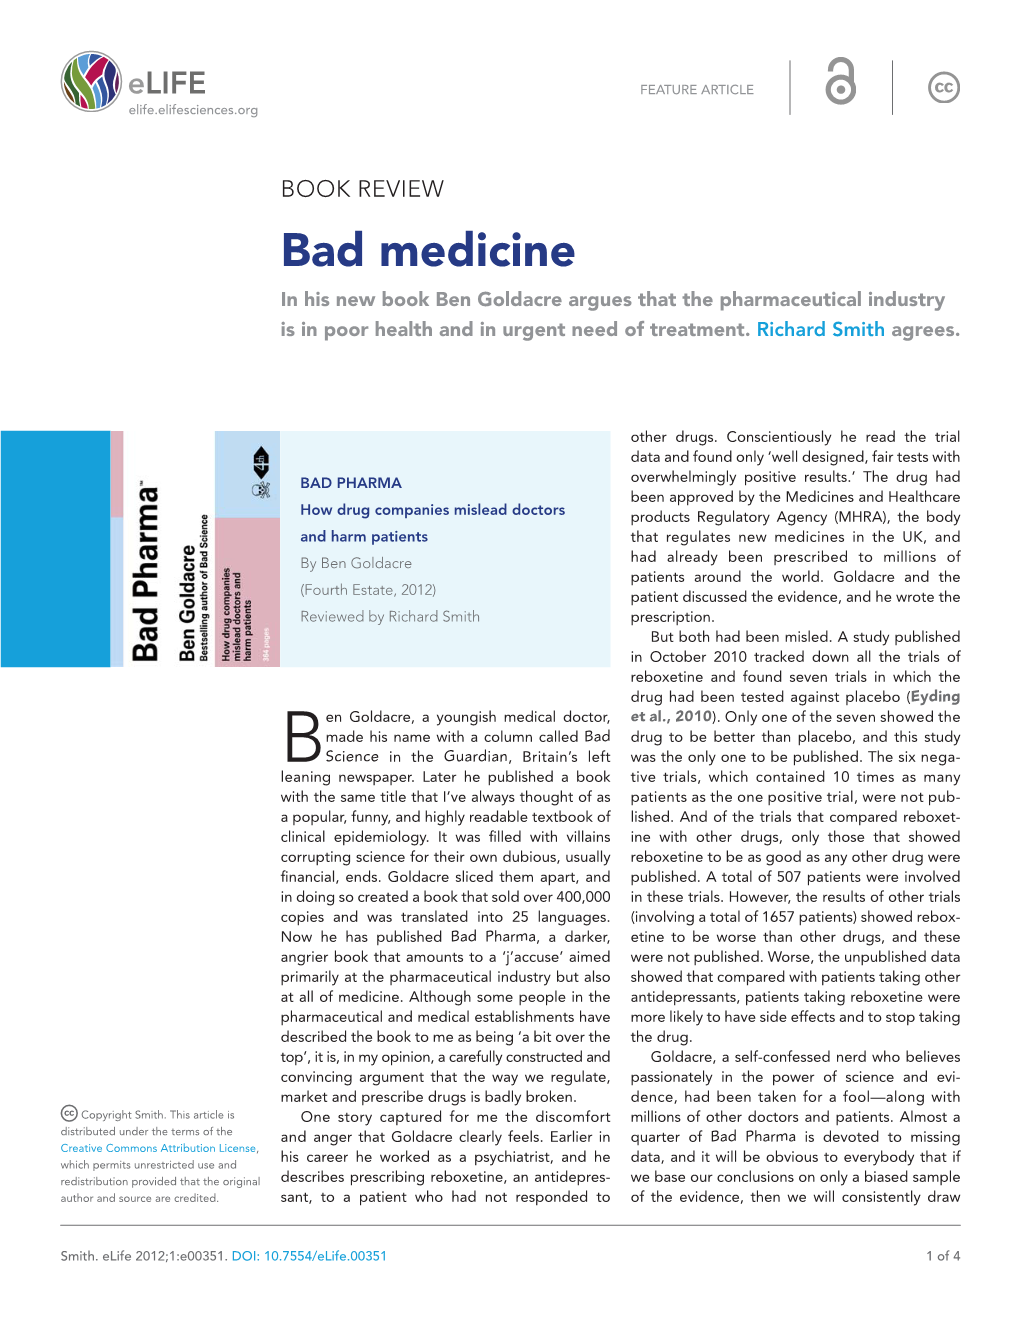 Bad Medicine in His New Book Ben Goldacre Argues That the Pharmaceutical Industry Is in Poor Health and in Urgent Need of Treatment